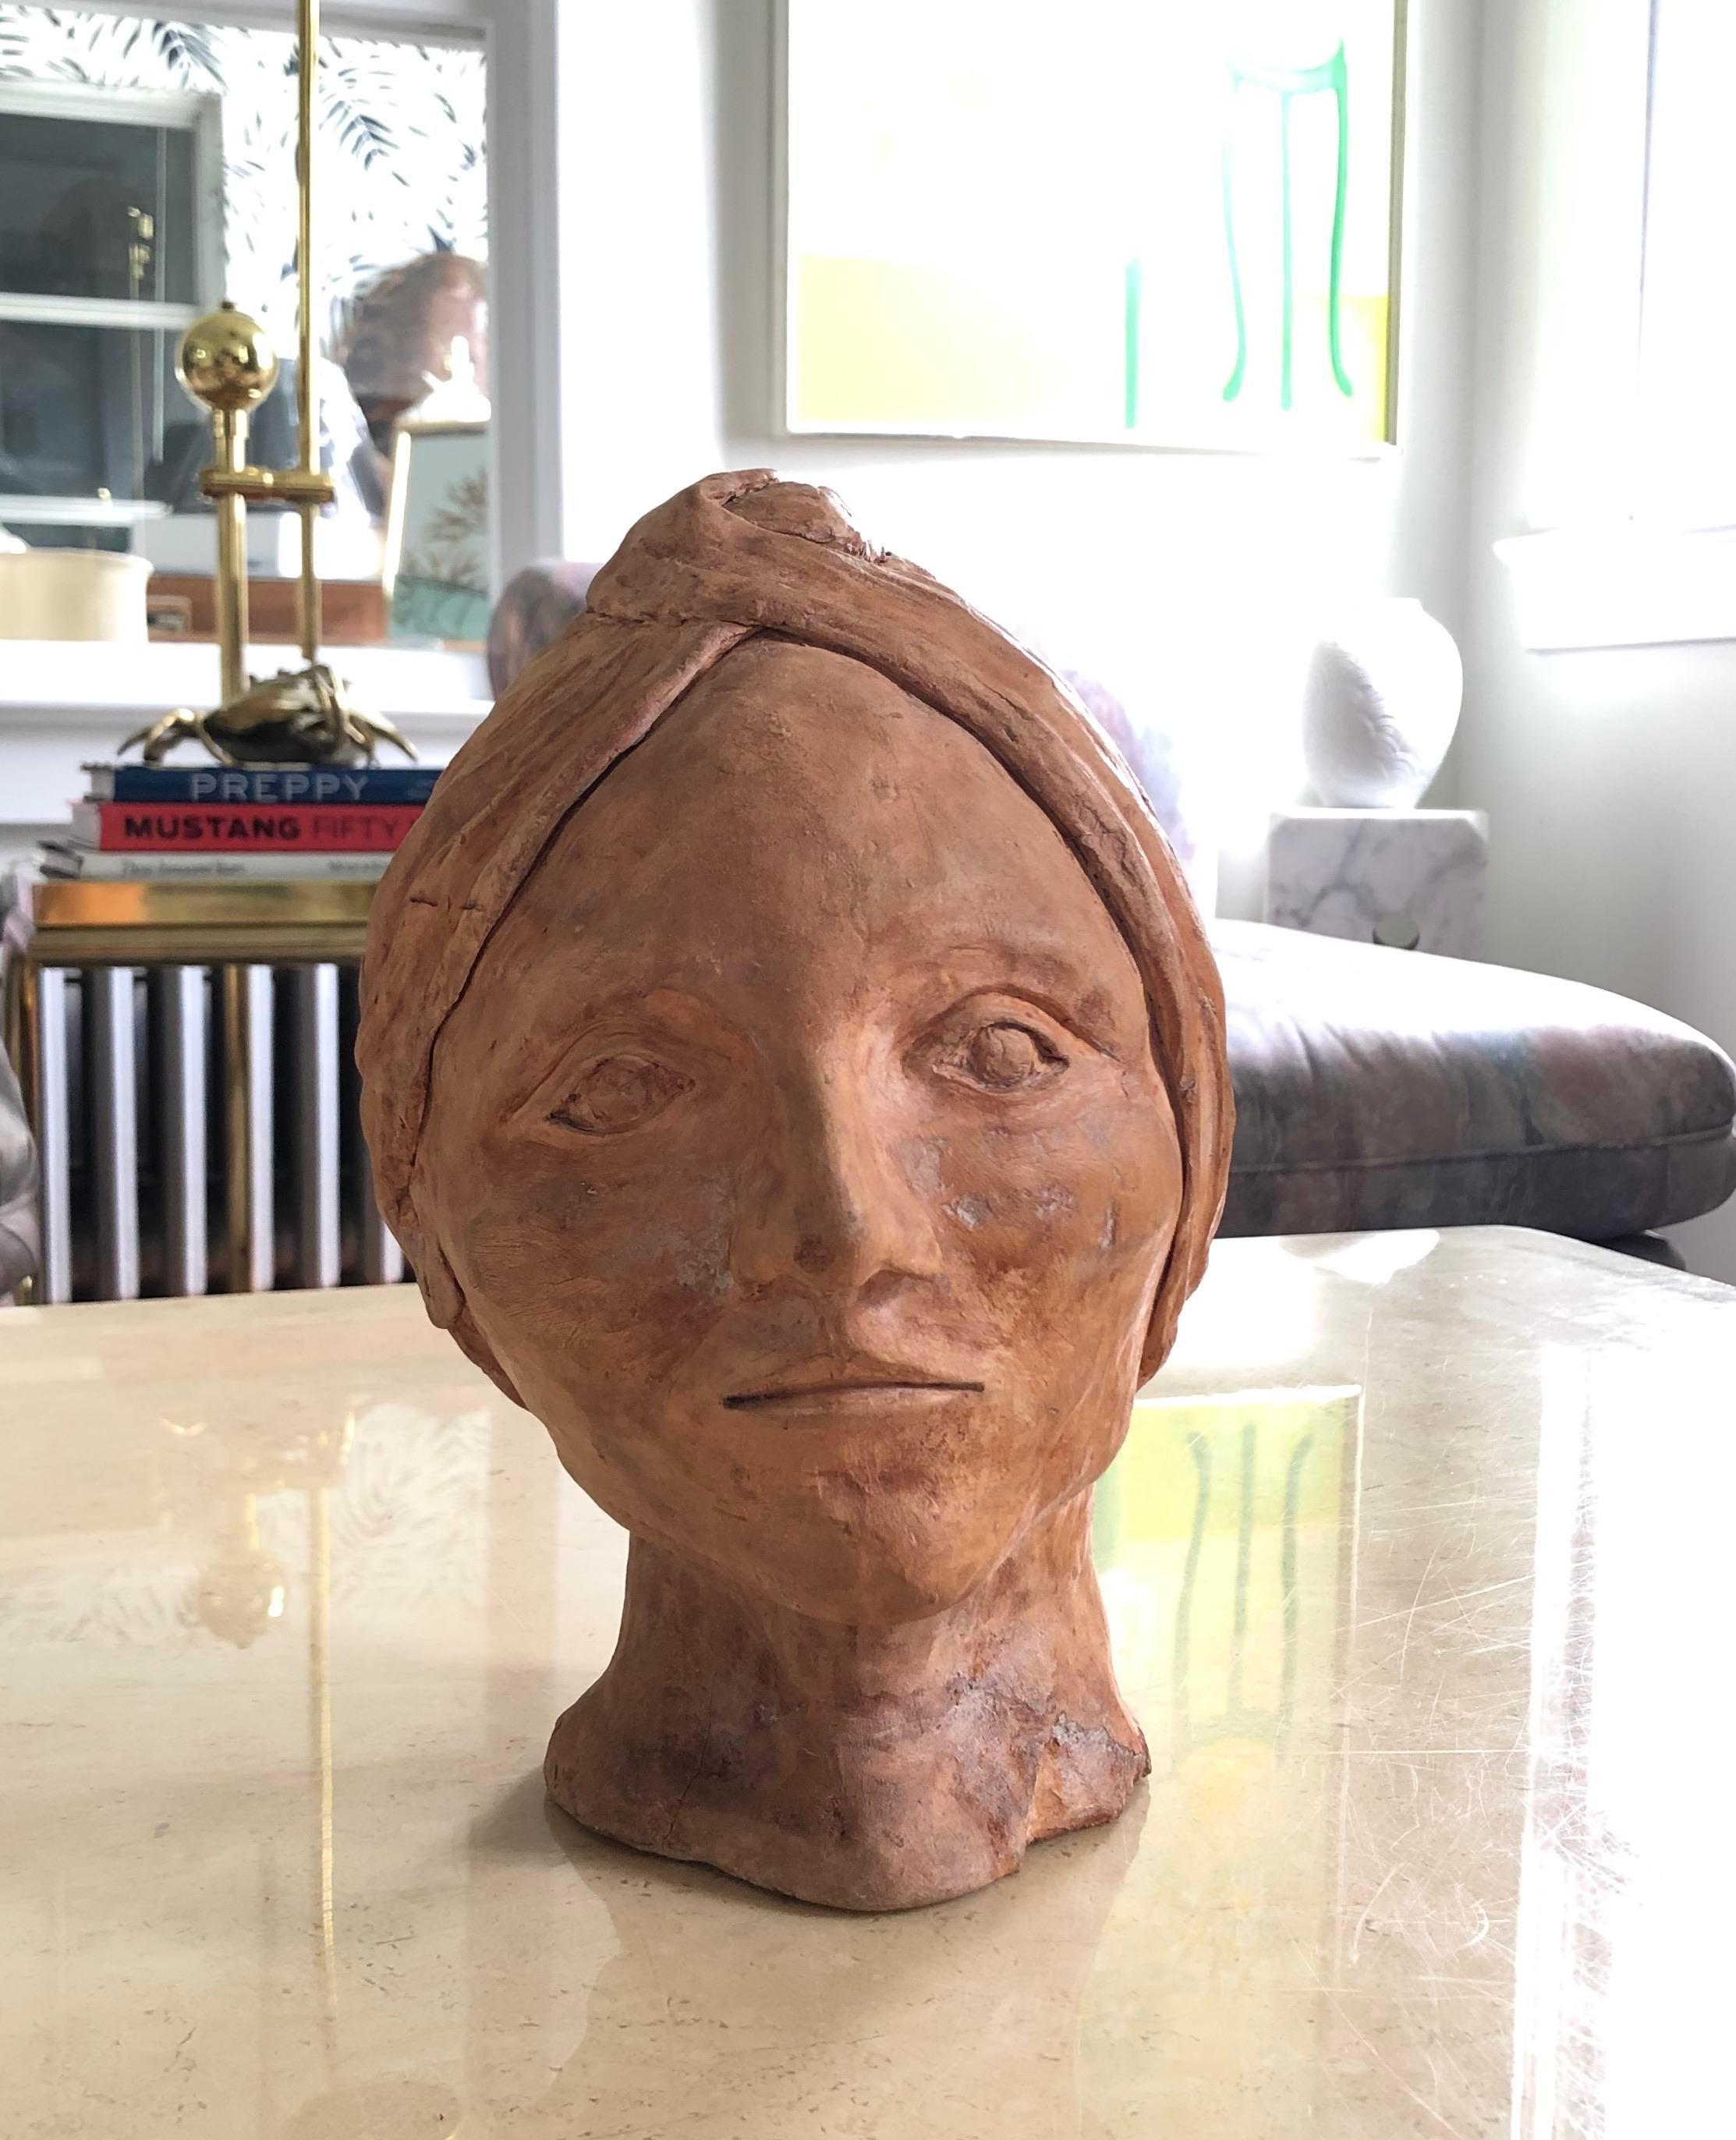 Nice period bust of a woman in a fashionable Turbin. Ready for the pool! Great period expression.